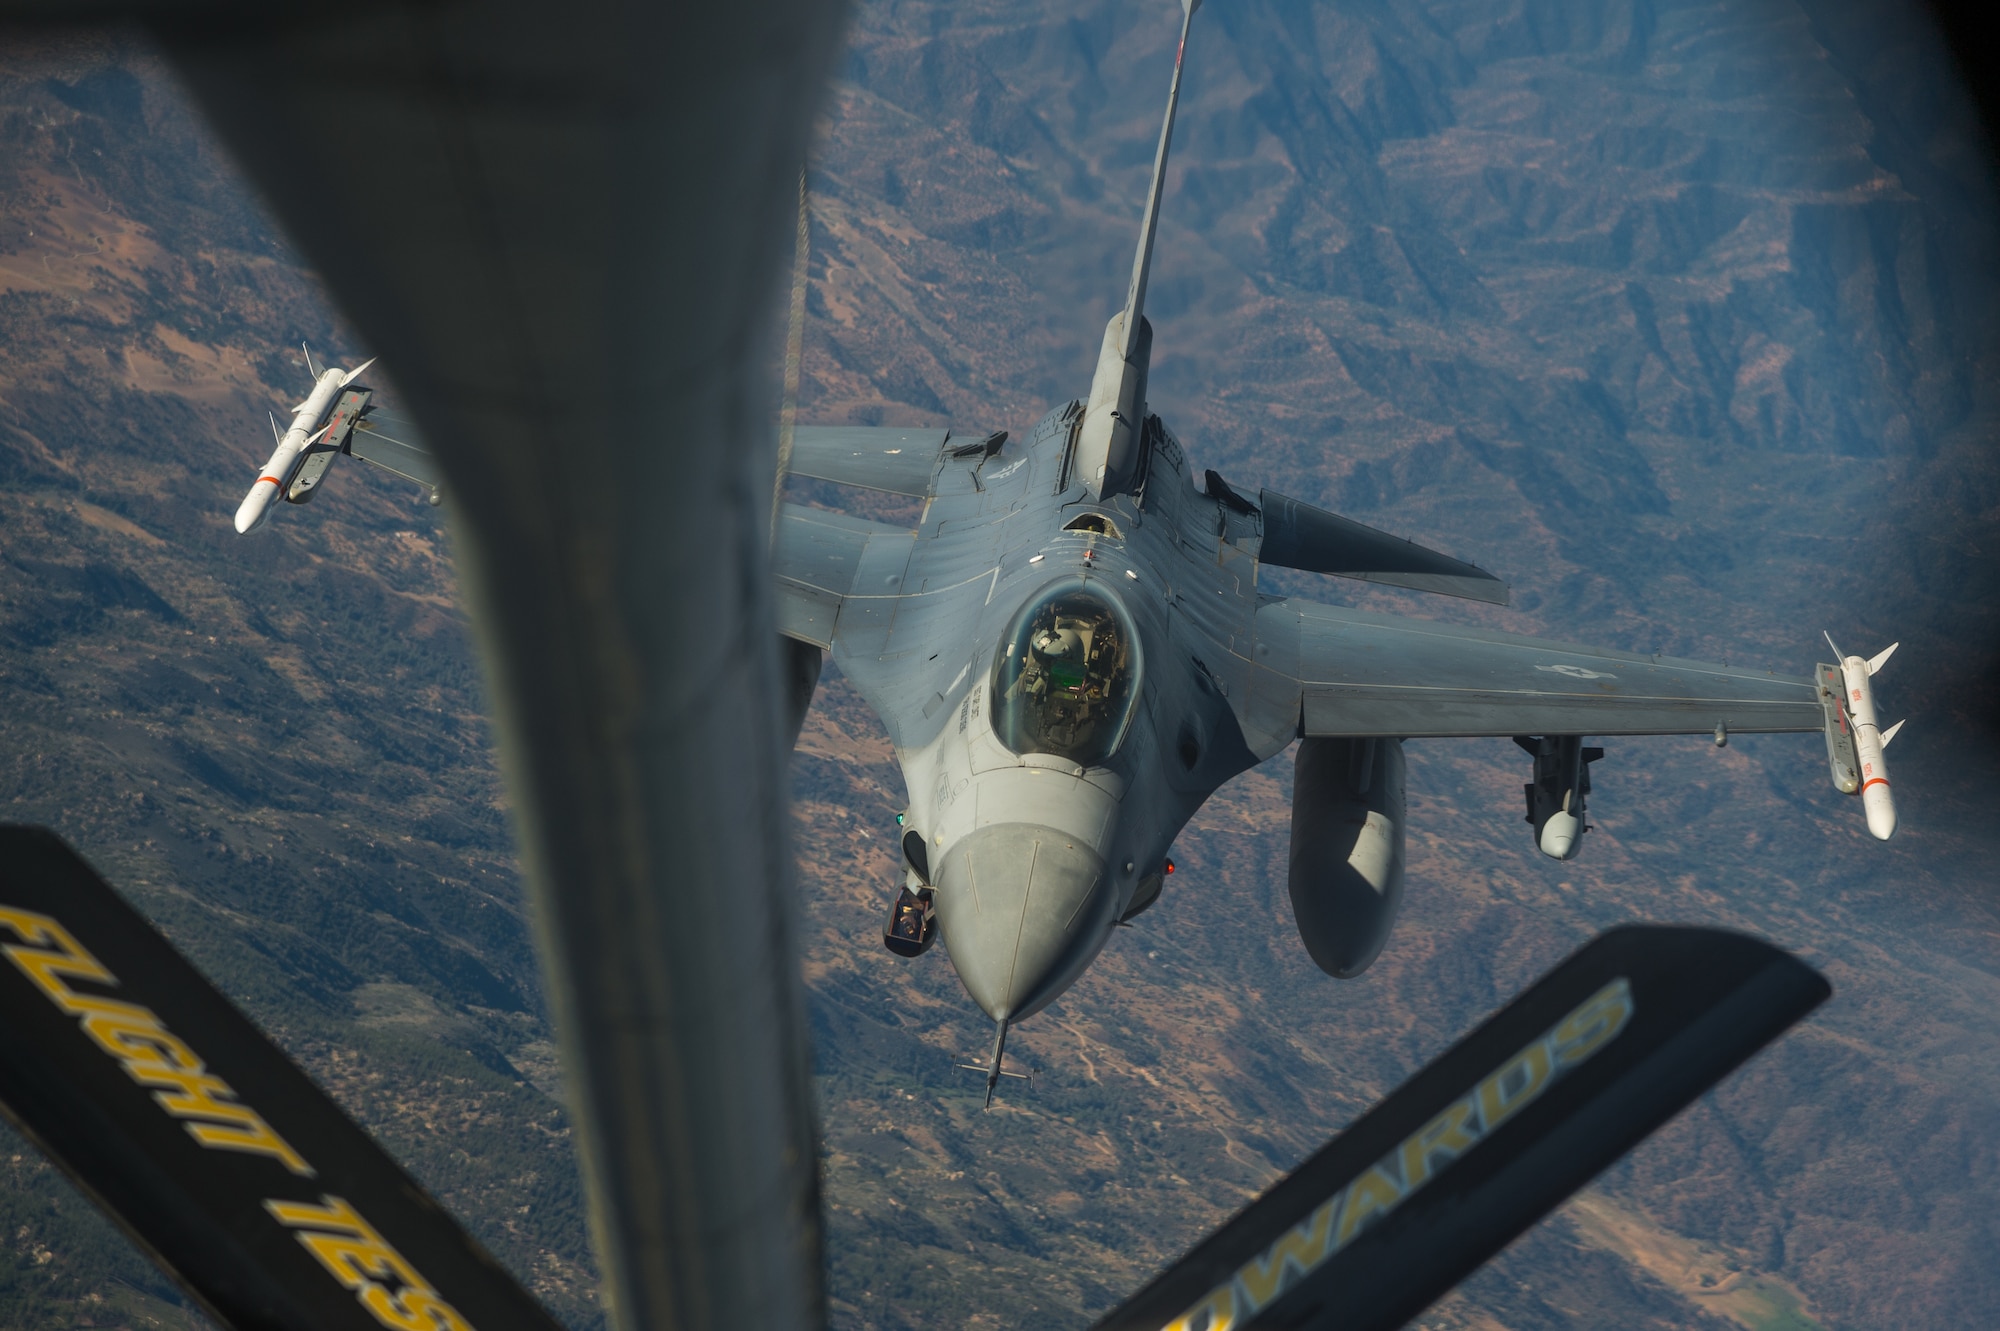 An F-16 Fighting Falcon flown by Maj. Jacob Schonig from the 416th Flight Test Squadron at Edwards Air Force Base, California, conducts a mid-air refueling operation with a KC-135 Stratotanker during a captive-carry flight test of a Gray Wolf cruise missile prototype, June 9. (Air Force photo by Ethan Wagner)